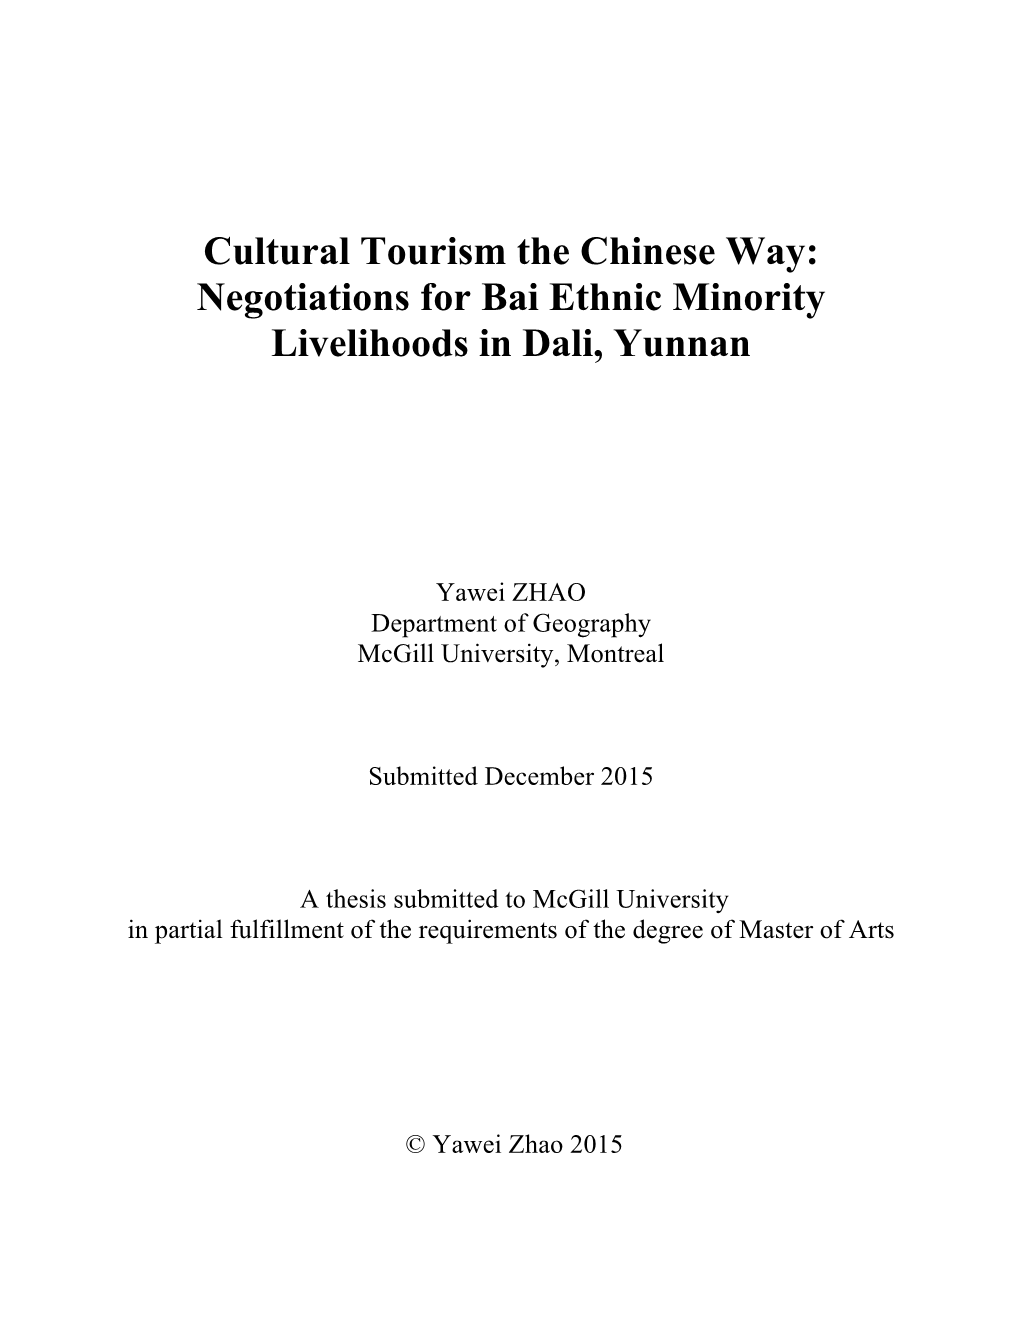 Cultural Tourism the Chinese Way: Negotiations for Bai Ethnic Minority Livelihoods in Dali, Yunnan